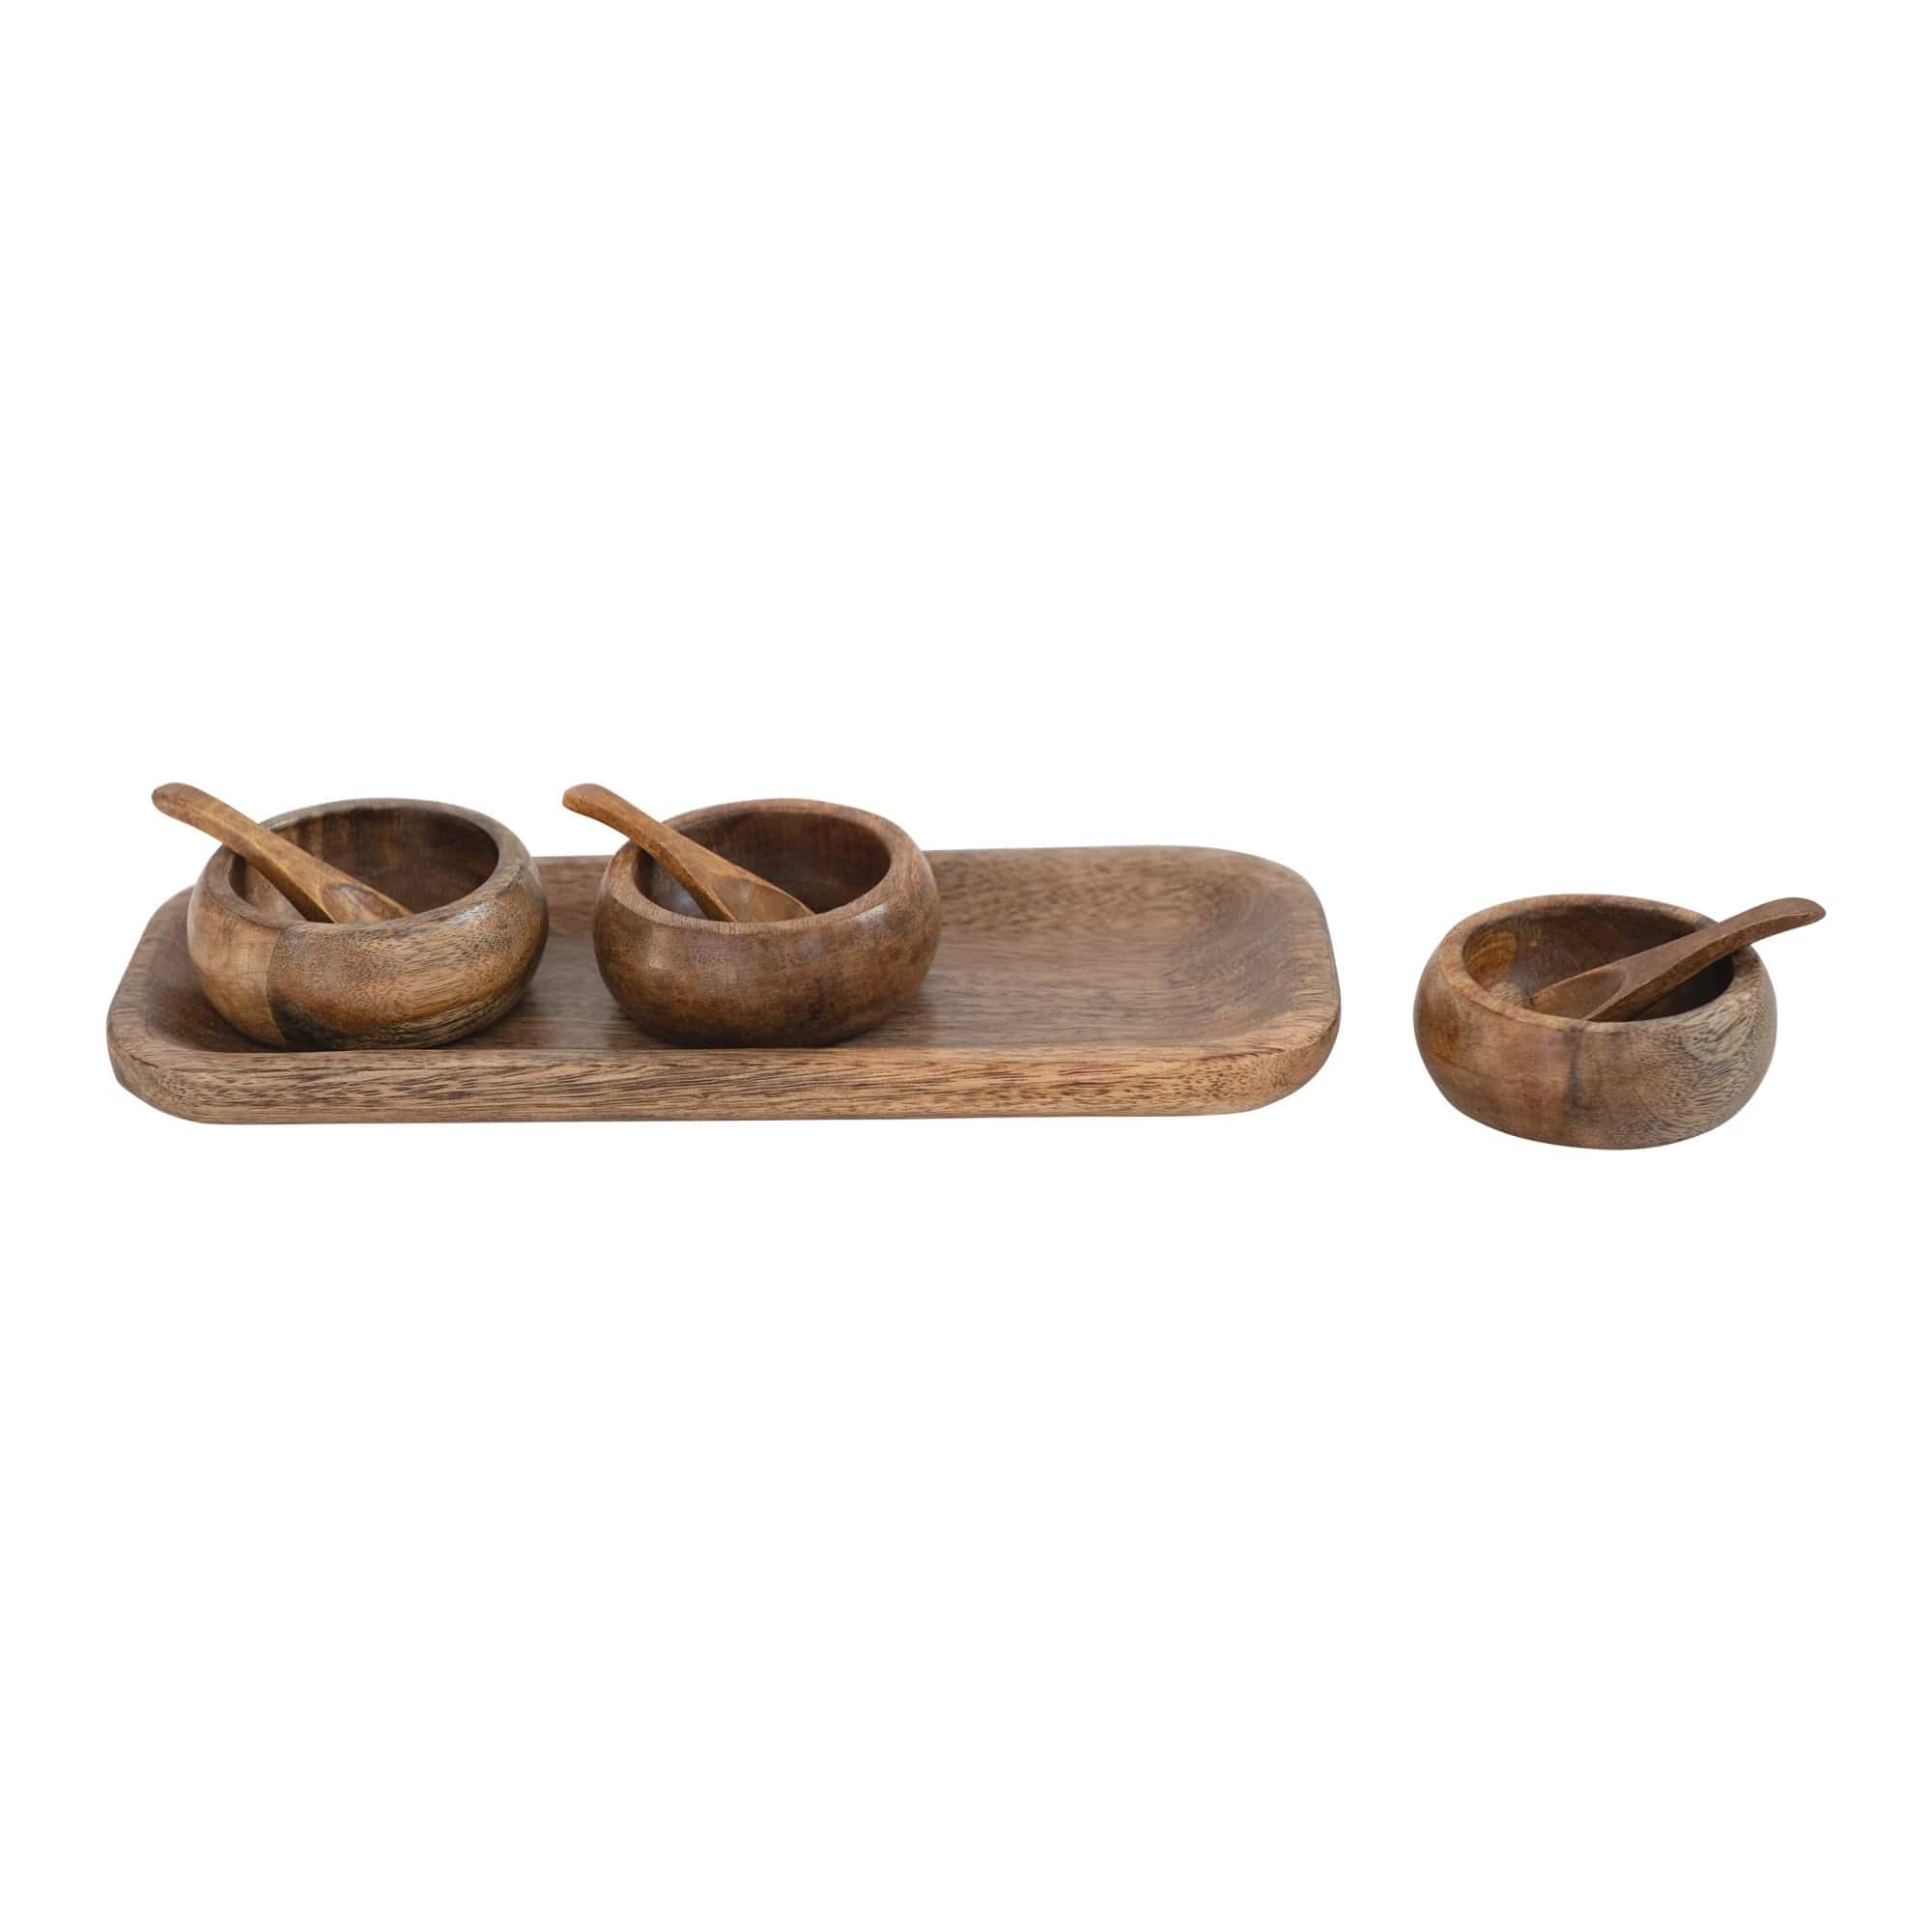 Bloomingville Bloomingville Mango Wood tray with 3 Bowls and Spoons - Little Miss Muffin Children & Home